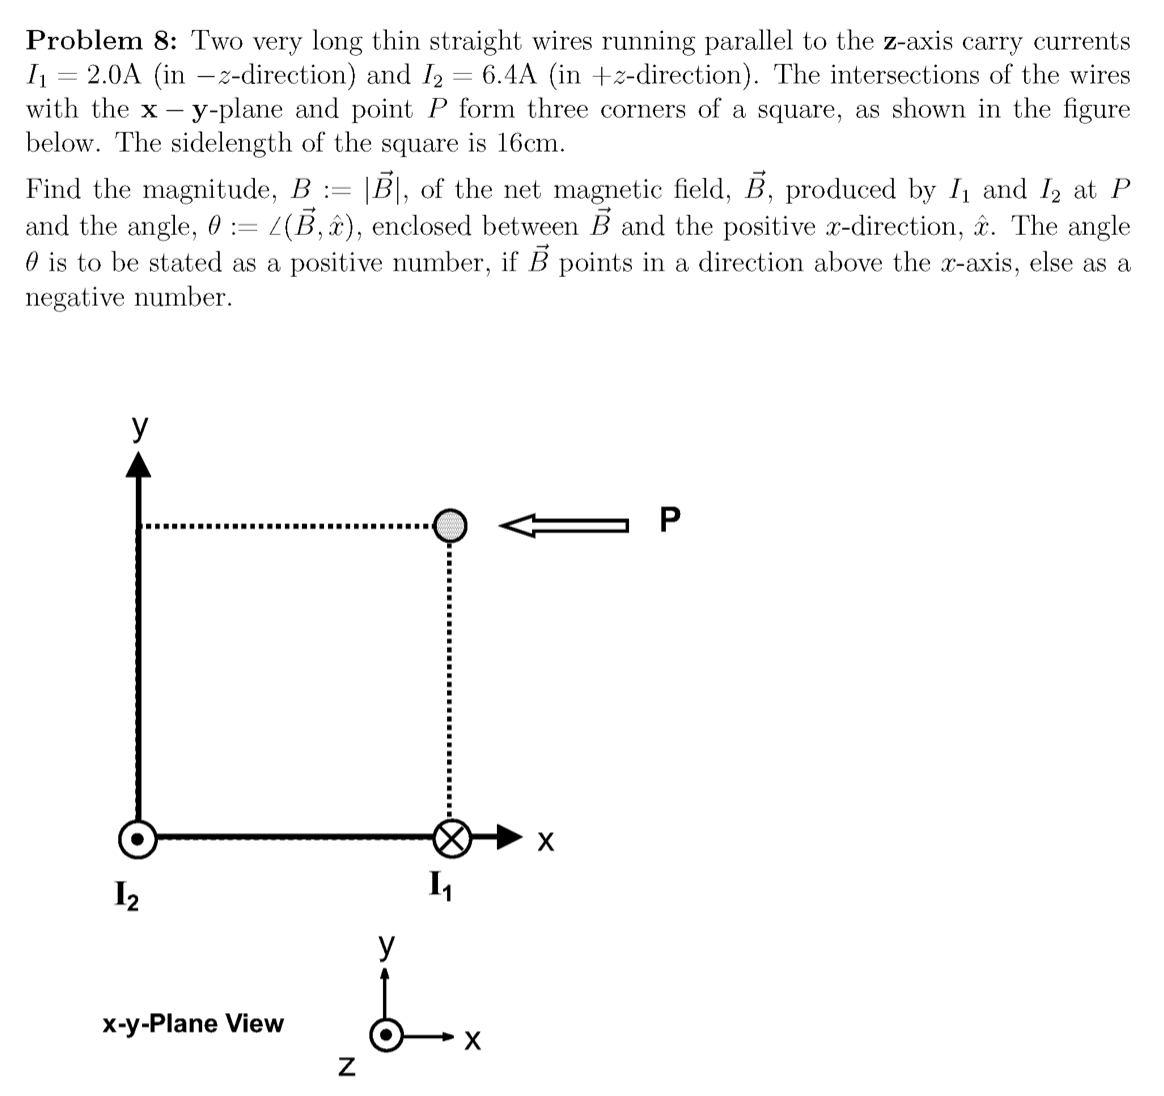 Problem 8: Two very long thin straight wires running parallel to the z-axis carry currents
= 2.0A (in –z-direction) and I2 = 6.4A (in +z-direction). The intersections of the wires
with the x - y-plane and point P form three corners of a square, as shown in the figure
below. The sidelength of the square is 16cm.
Find the magnitude, B := |B|, of the net magnetic field, B, produced by I1 and I2 at P
and the angle, 0 := L(B,x), enclosed between B and the positive x-direction, r. The angle
O is to be stated as a positive number, if B points in a direction above the x-axis, else as a
negative number.
У
I2
I4
У
x-y-Plane View
х
P.
